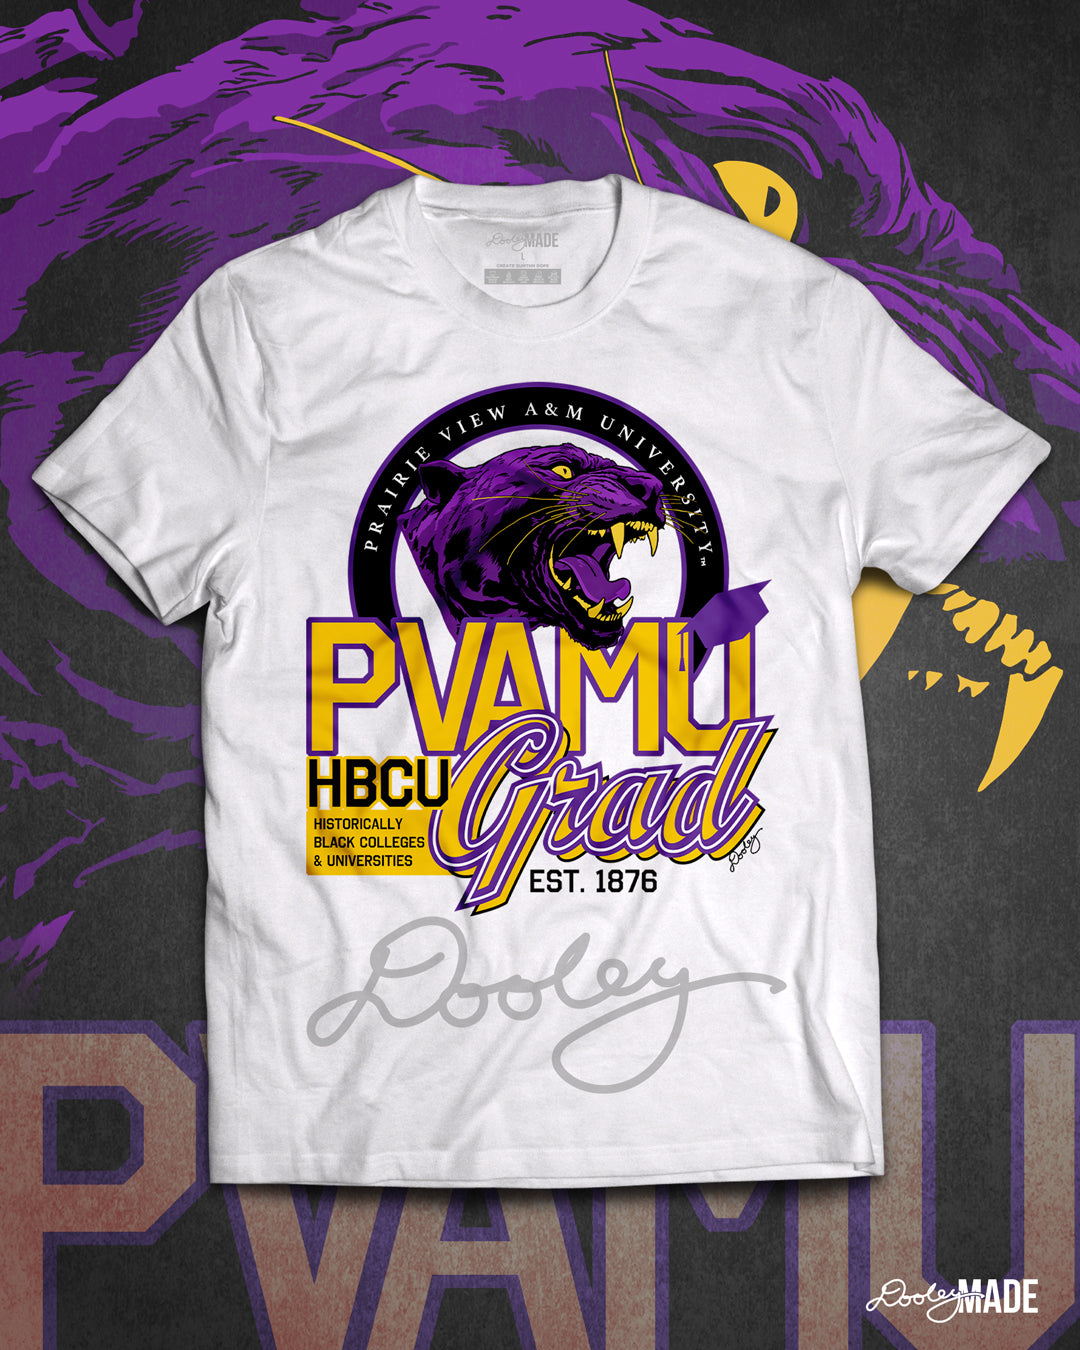 A white Prairie View A&M graduation shirt featuring a roaring panther surrounded by a circular frame with the university name inside of it, and the words "PVAMU Grad" next to HBCU. 